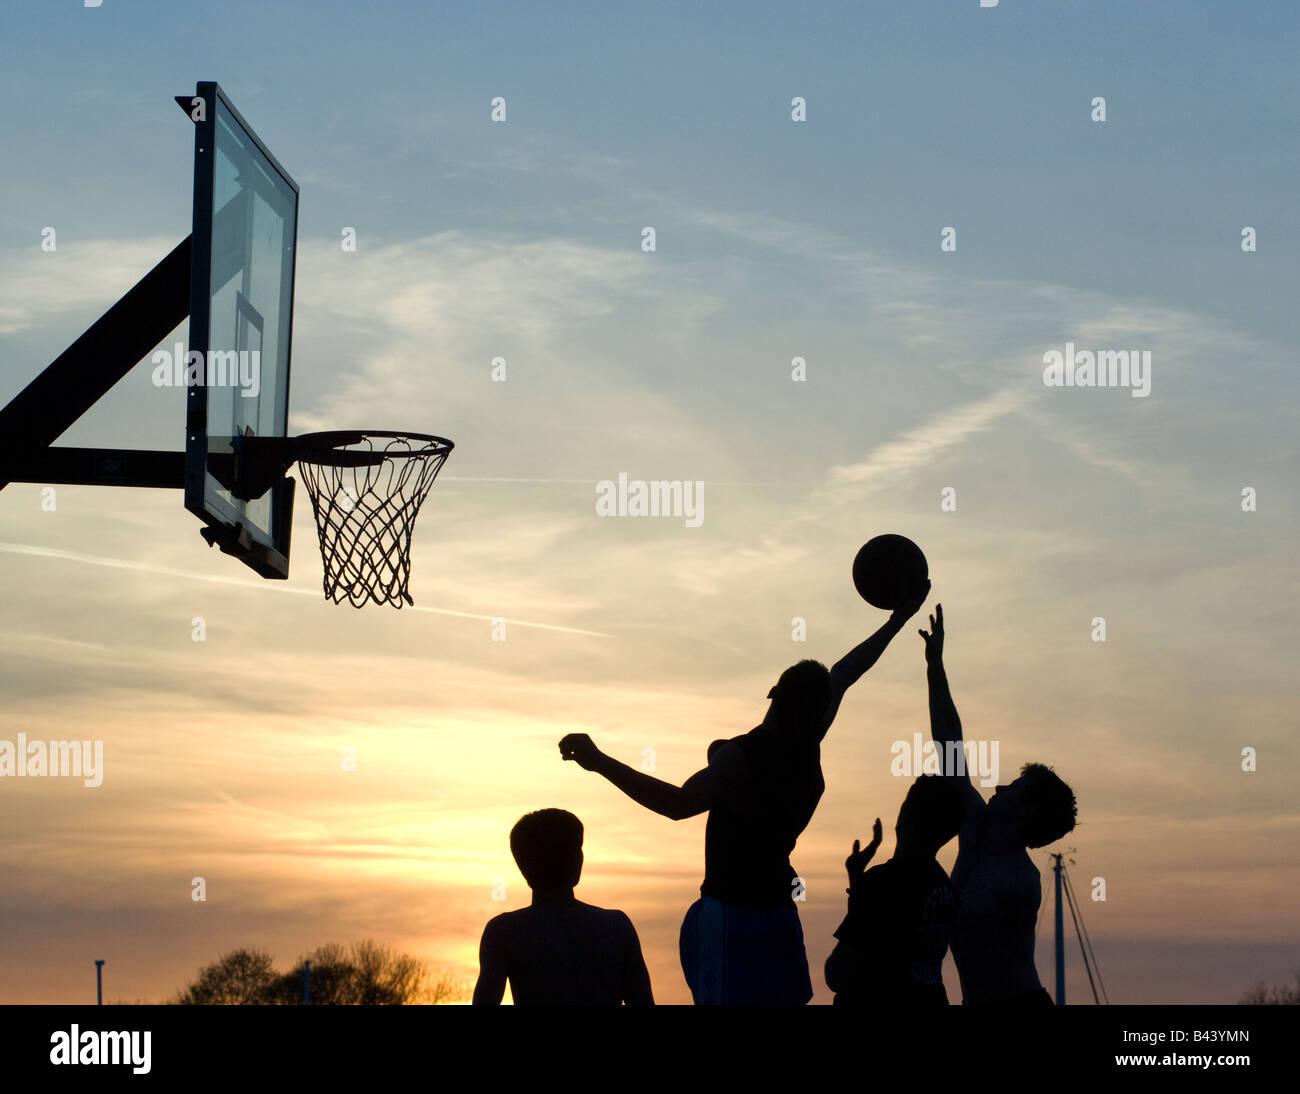 Basketball players shooting basket at sunset in outdoor park, Westport, Ct. Stock Photo